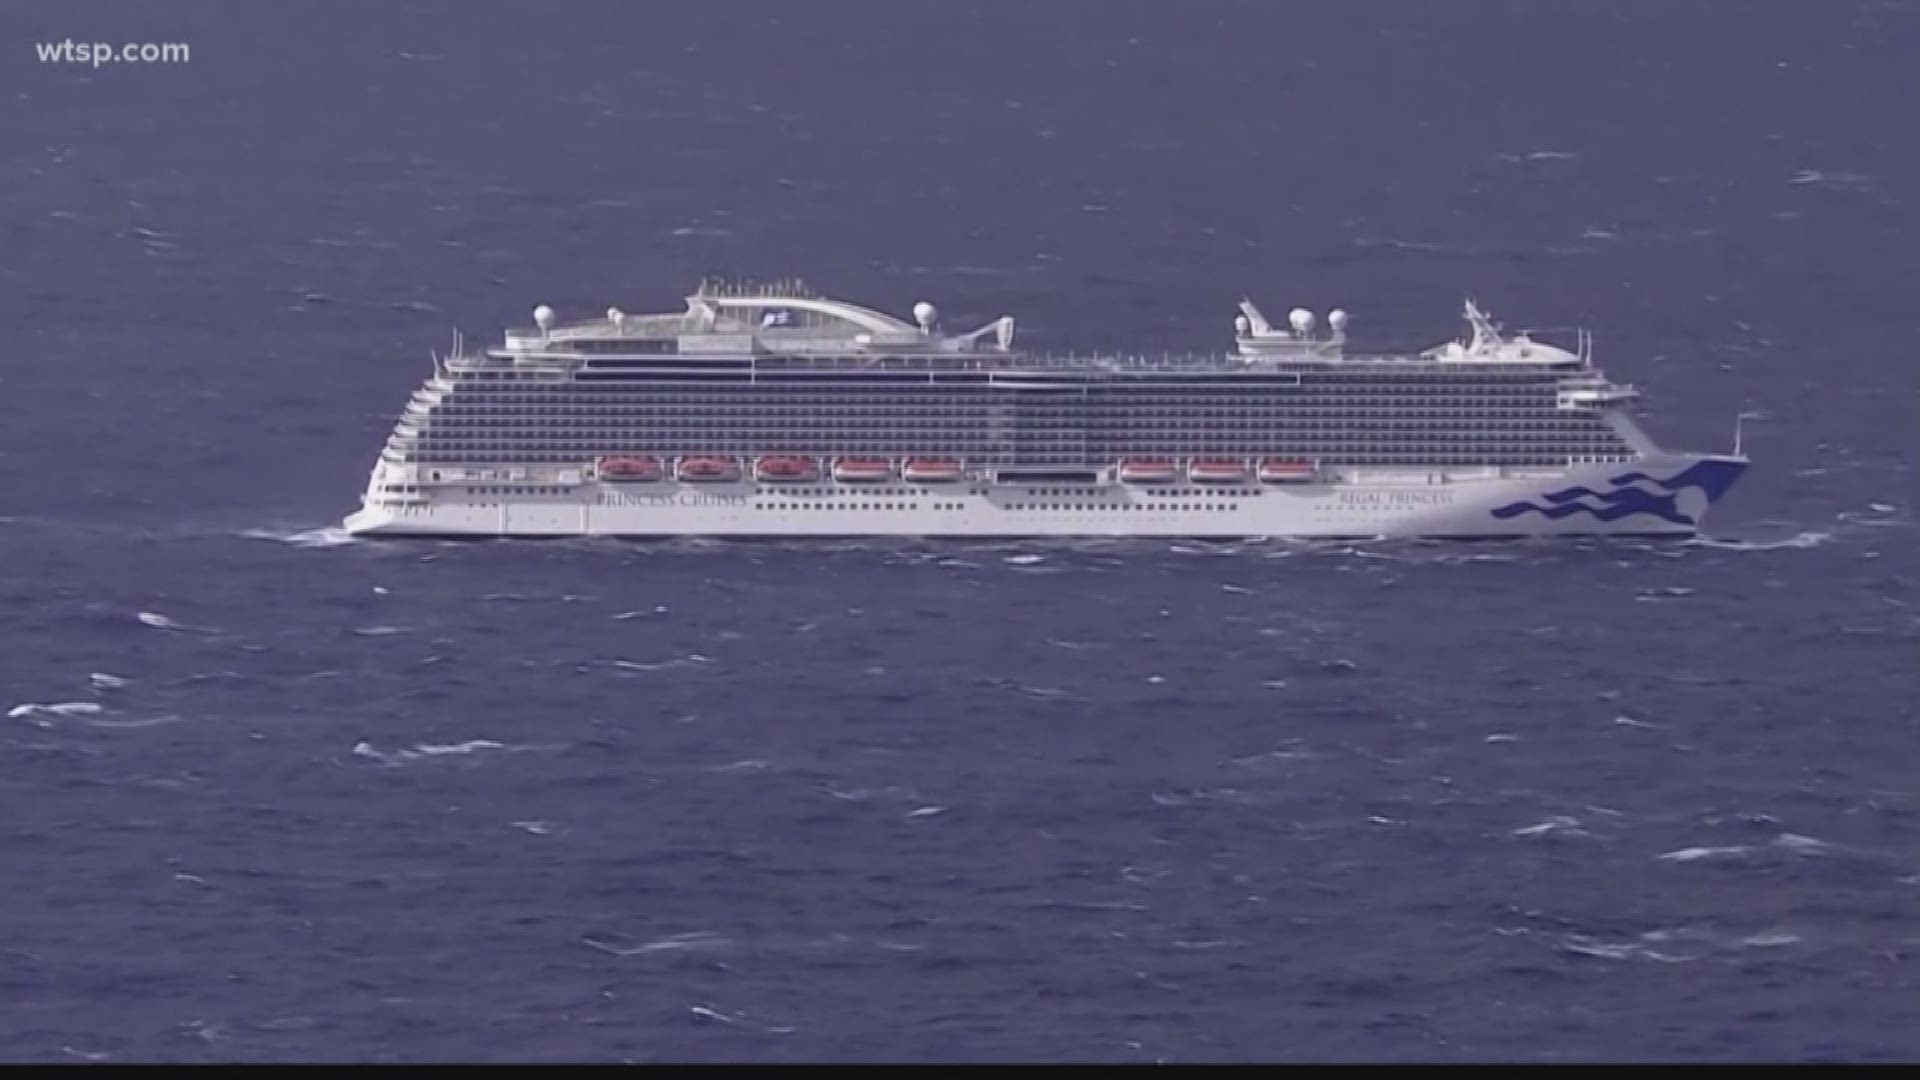 The CDC rescinded the no sail order for the Regal Princess Sunday.